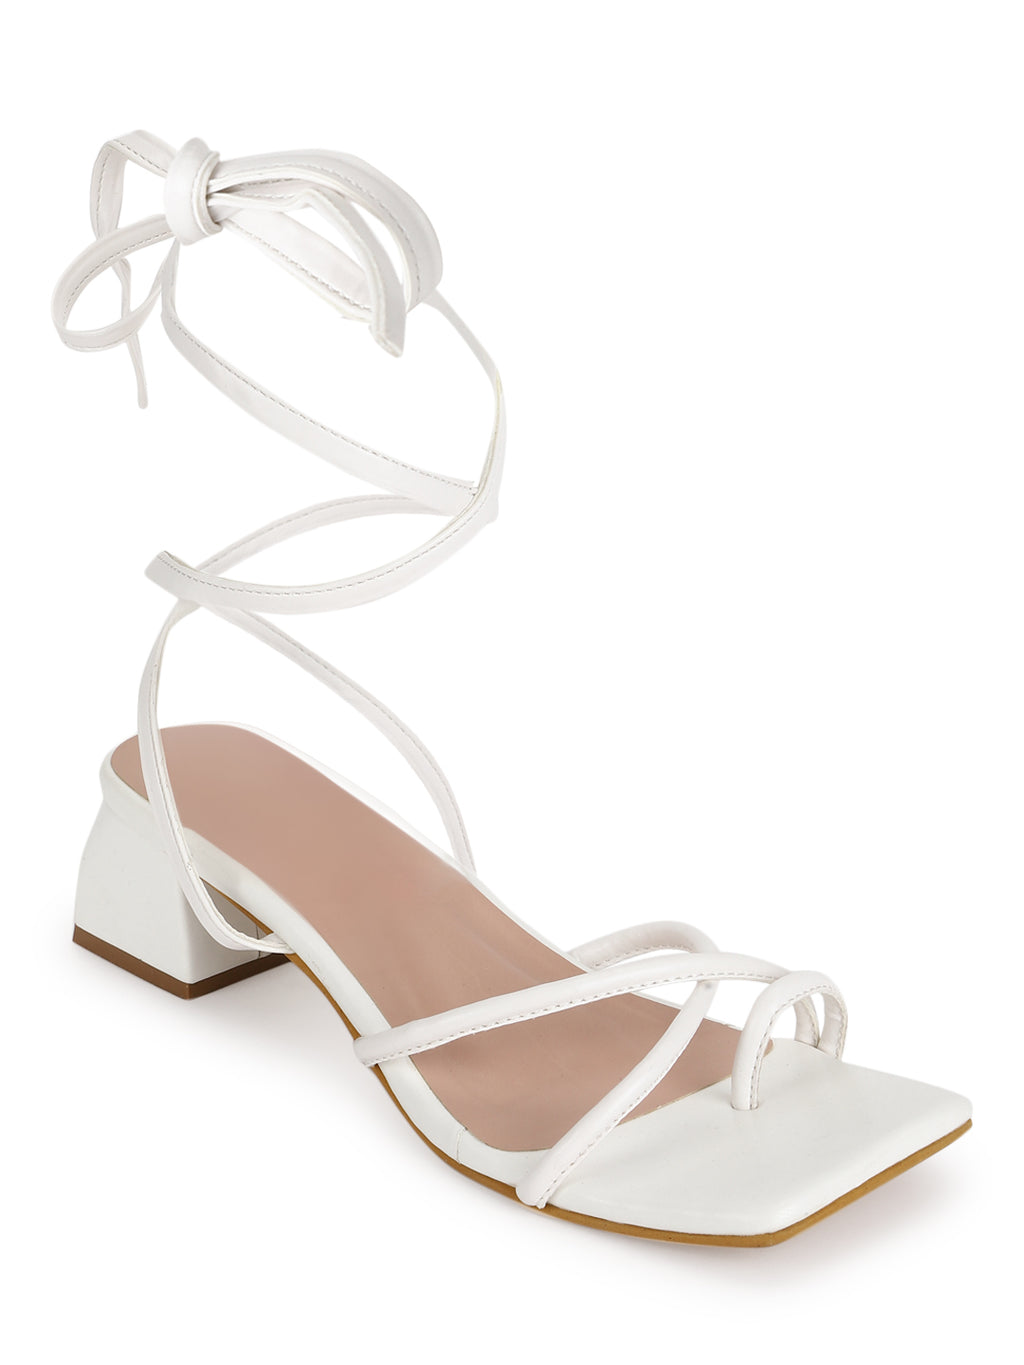 Phoenix Lace Up Block Heel (White) - Lilly's Kloset | Block heels wedding, Lace  up block heel, Heels